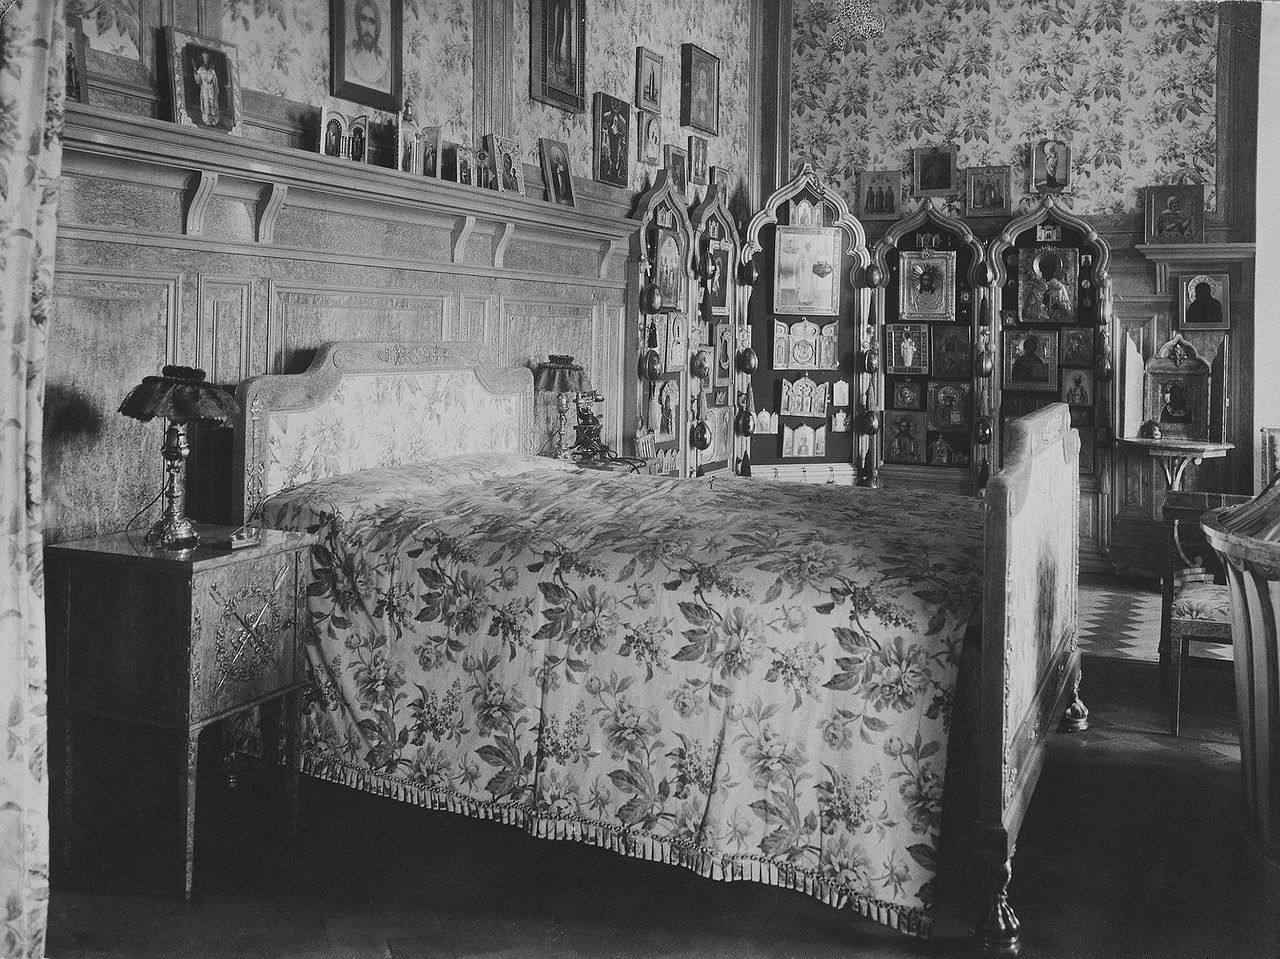 In 1904, Nicholas II transferred the permanent residence to Alexandrovsky Palace in Tsarskoye Selo, the royal family's estate located near the city of Pushkin, 25 kilometers from St. Petersburg. / Emperor Nicholas II’s bedroom.